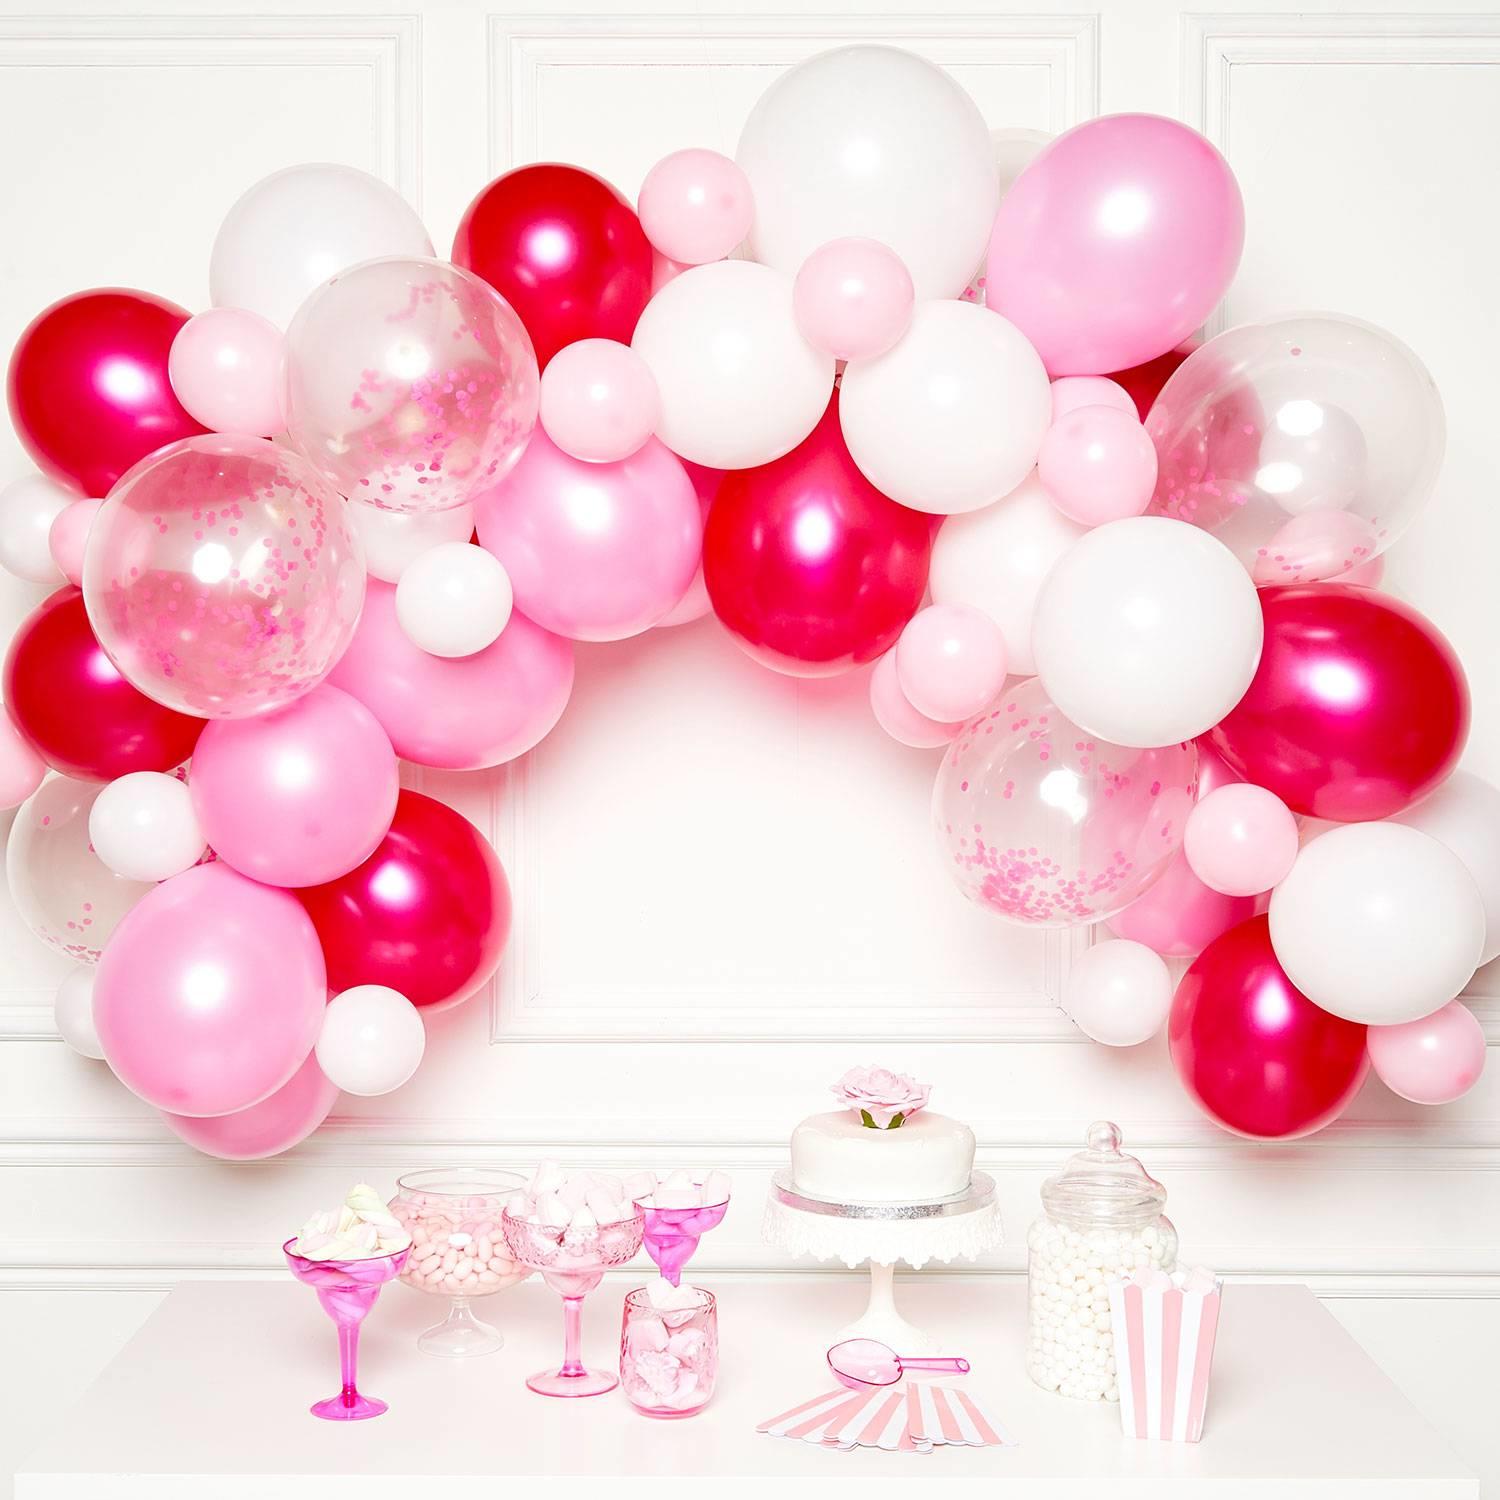 Pink Latex Balloon Arch DIY Kit by Amscan 9907433  available here at Karnival Costumes online party shop